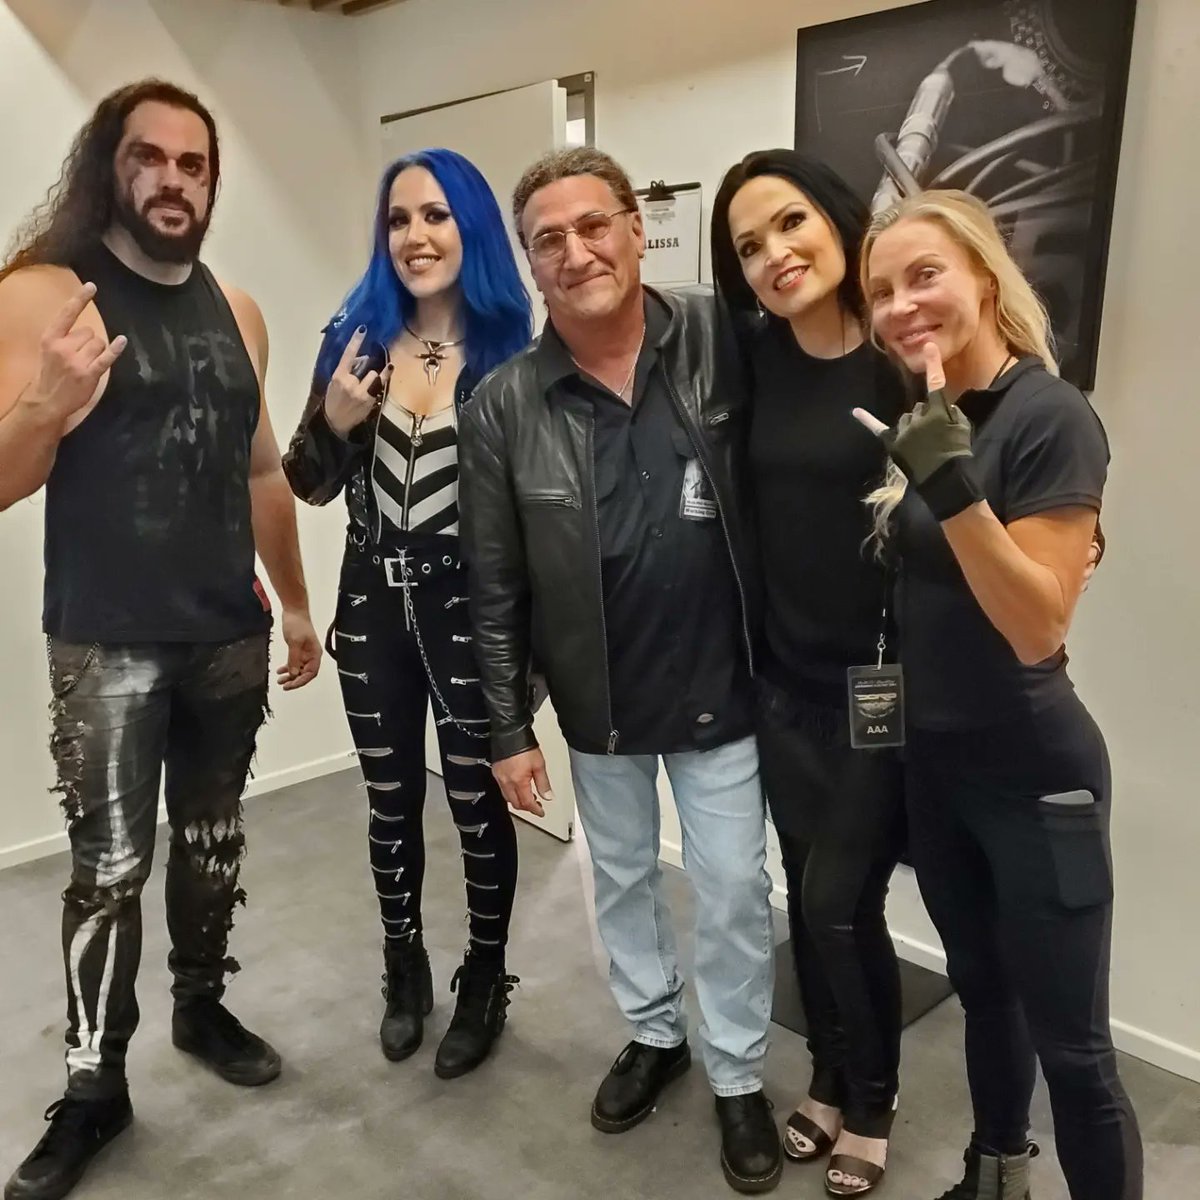 Great to see Stephan, Angela, Tarja and Alissa backstage at Doro's 40th Anniversary show in Dusseldorf, Germany. Full story and photos coming in Metal Contraband in 2 weeks. @DoroOfficial @AWhiteGluz @tarjaofficial